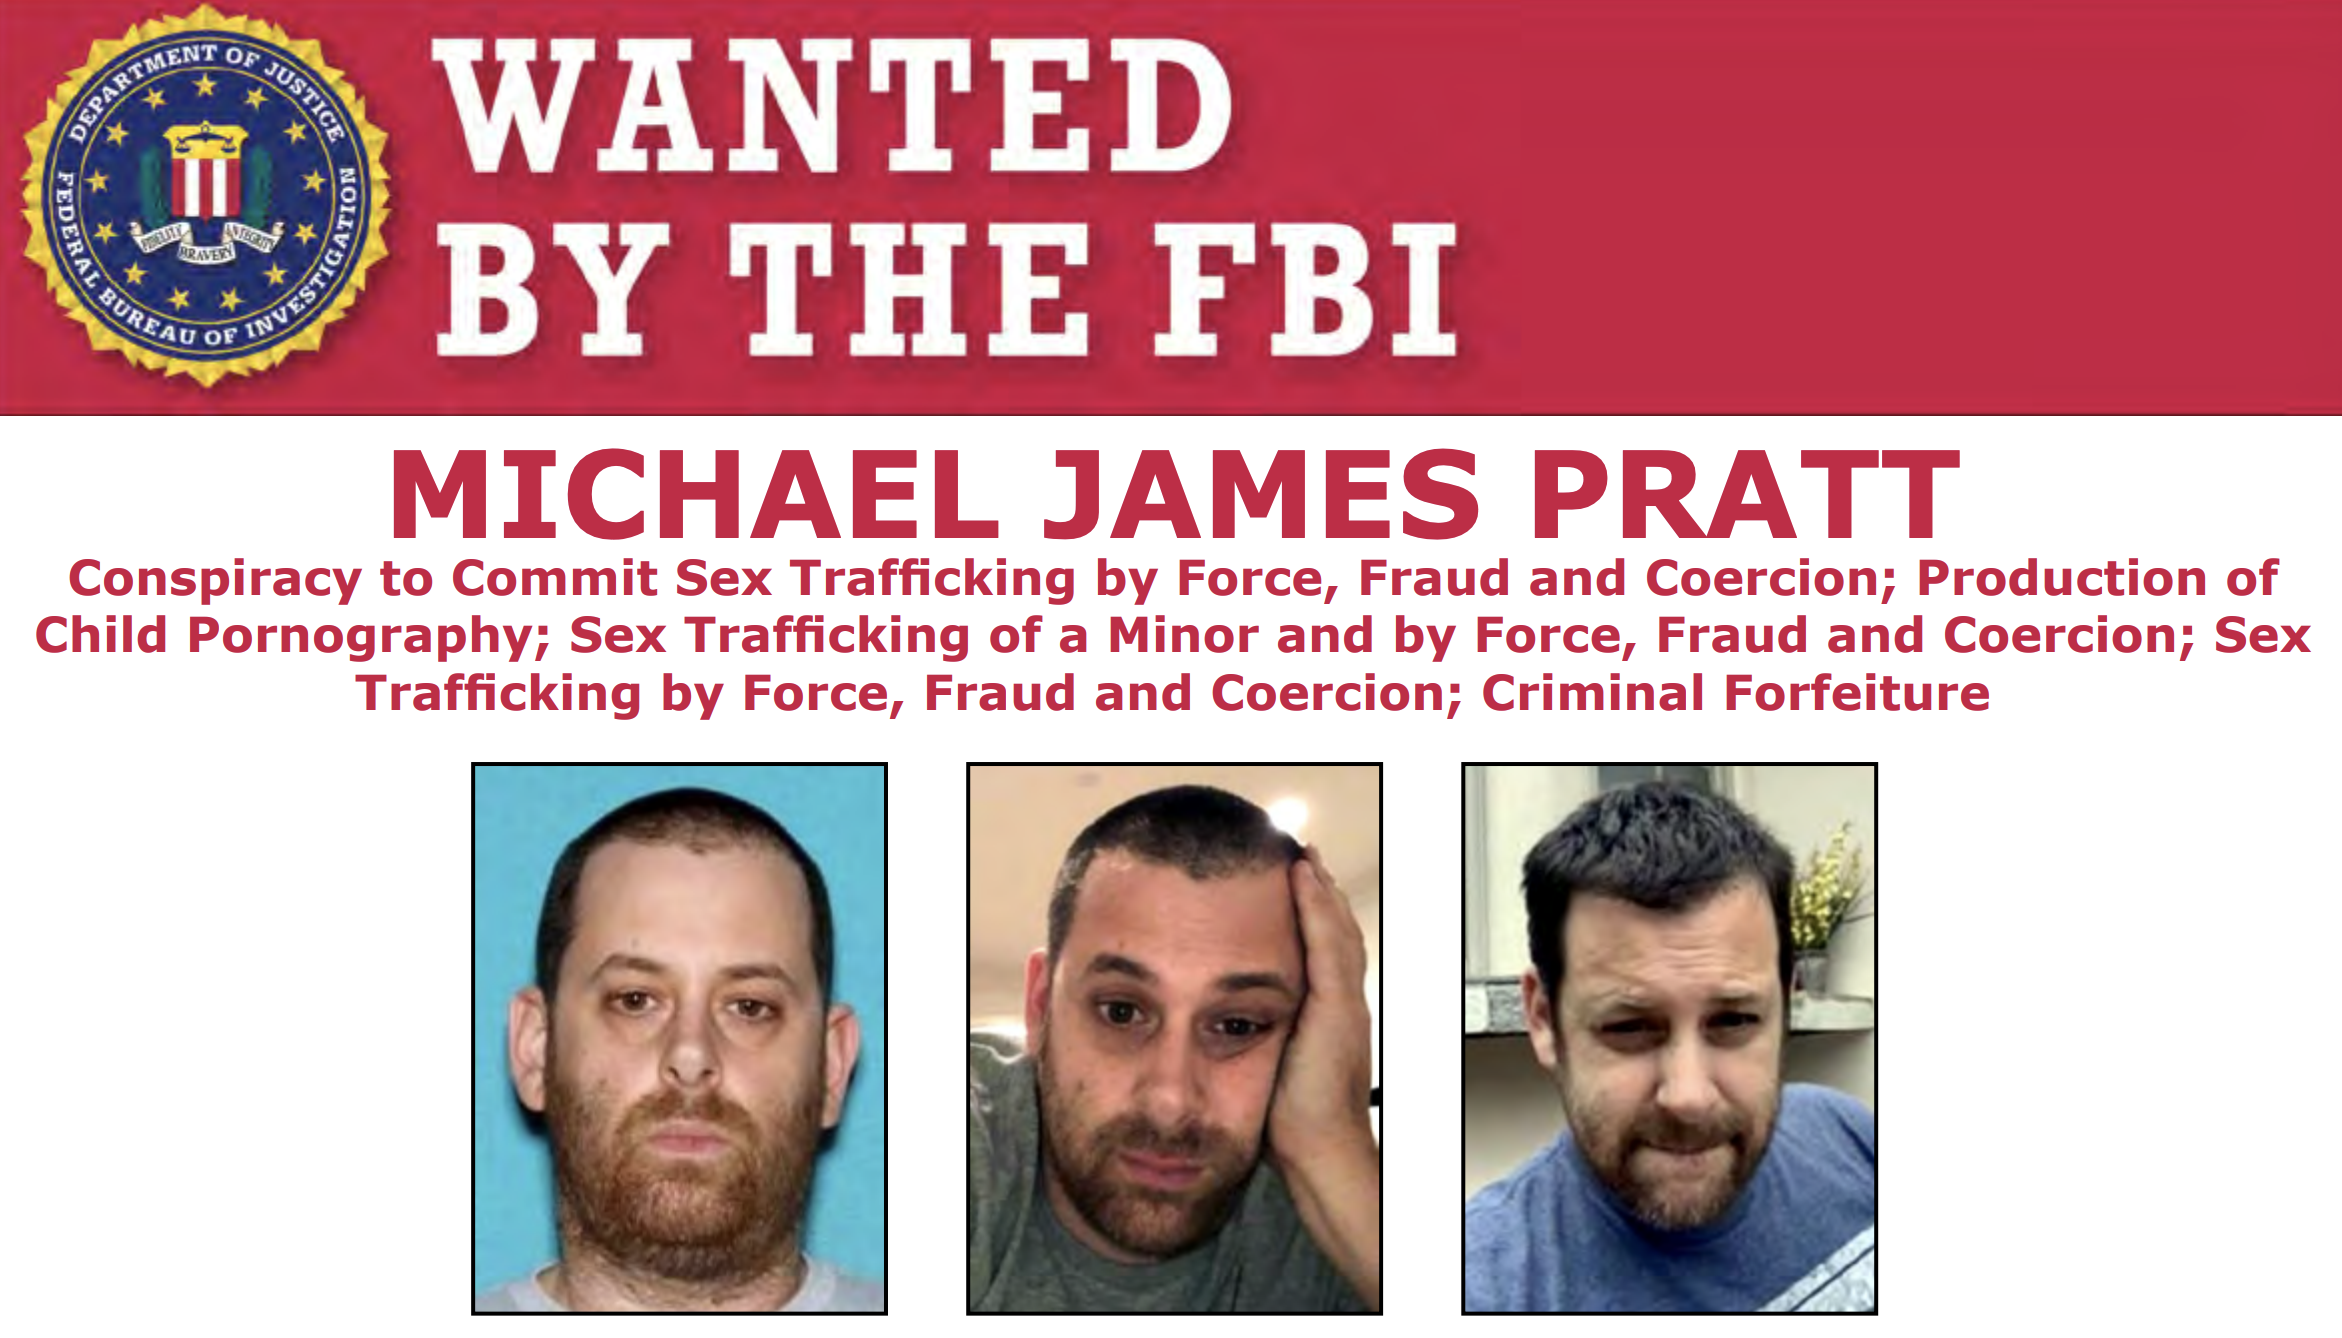 FBI Seeking Publics Assistance to Locate Michael James Pratt, Wanted for Sex Trafficking and Production of Child Pornography — picture image